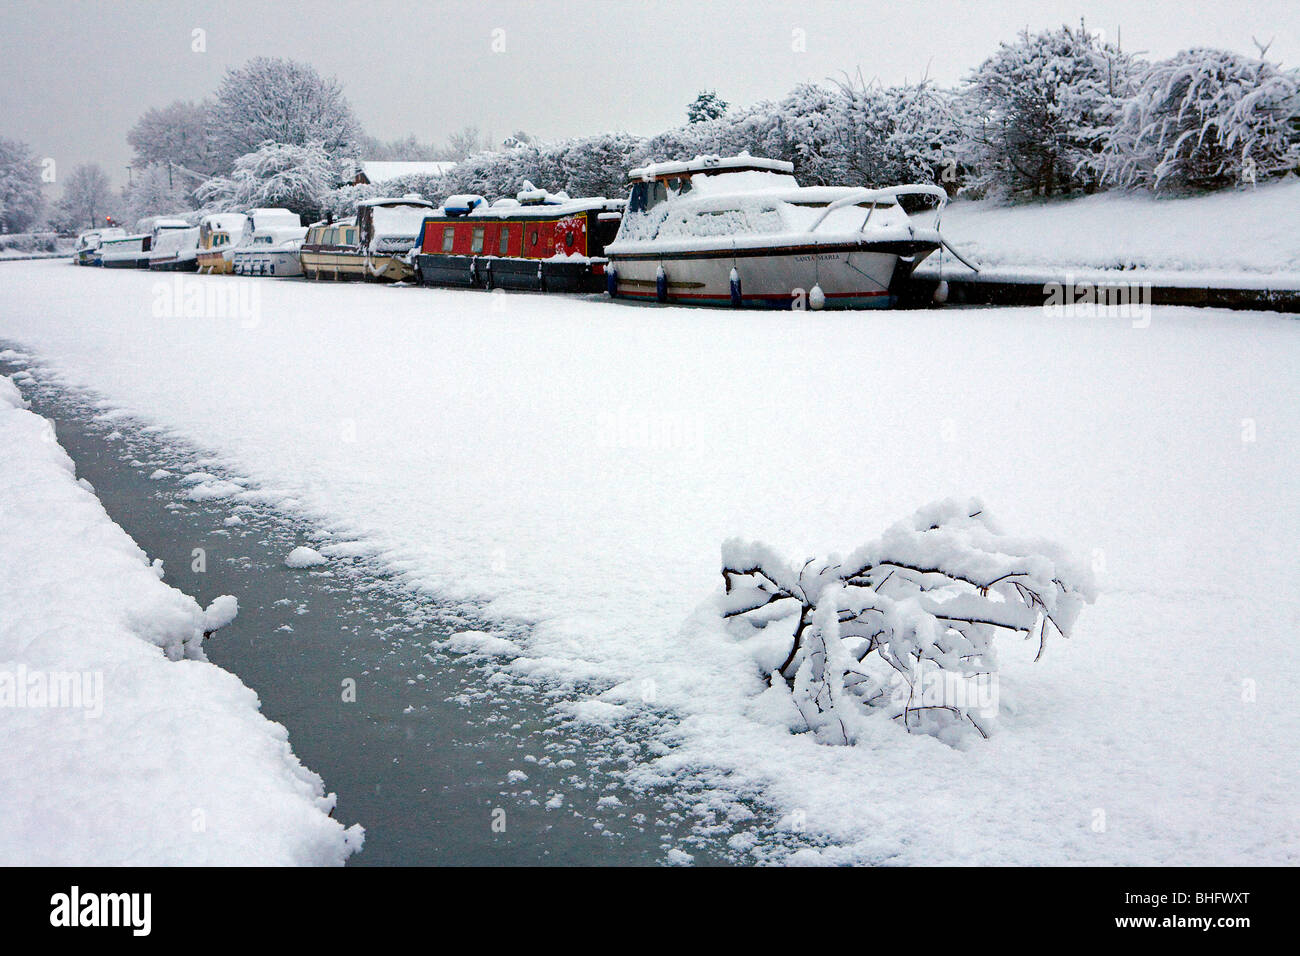 Boats frozen into their moorings with snow covering the iced up Bridgewater canal and a snow covered branch in the foreground Stock Photo